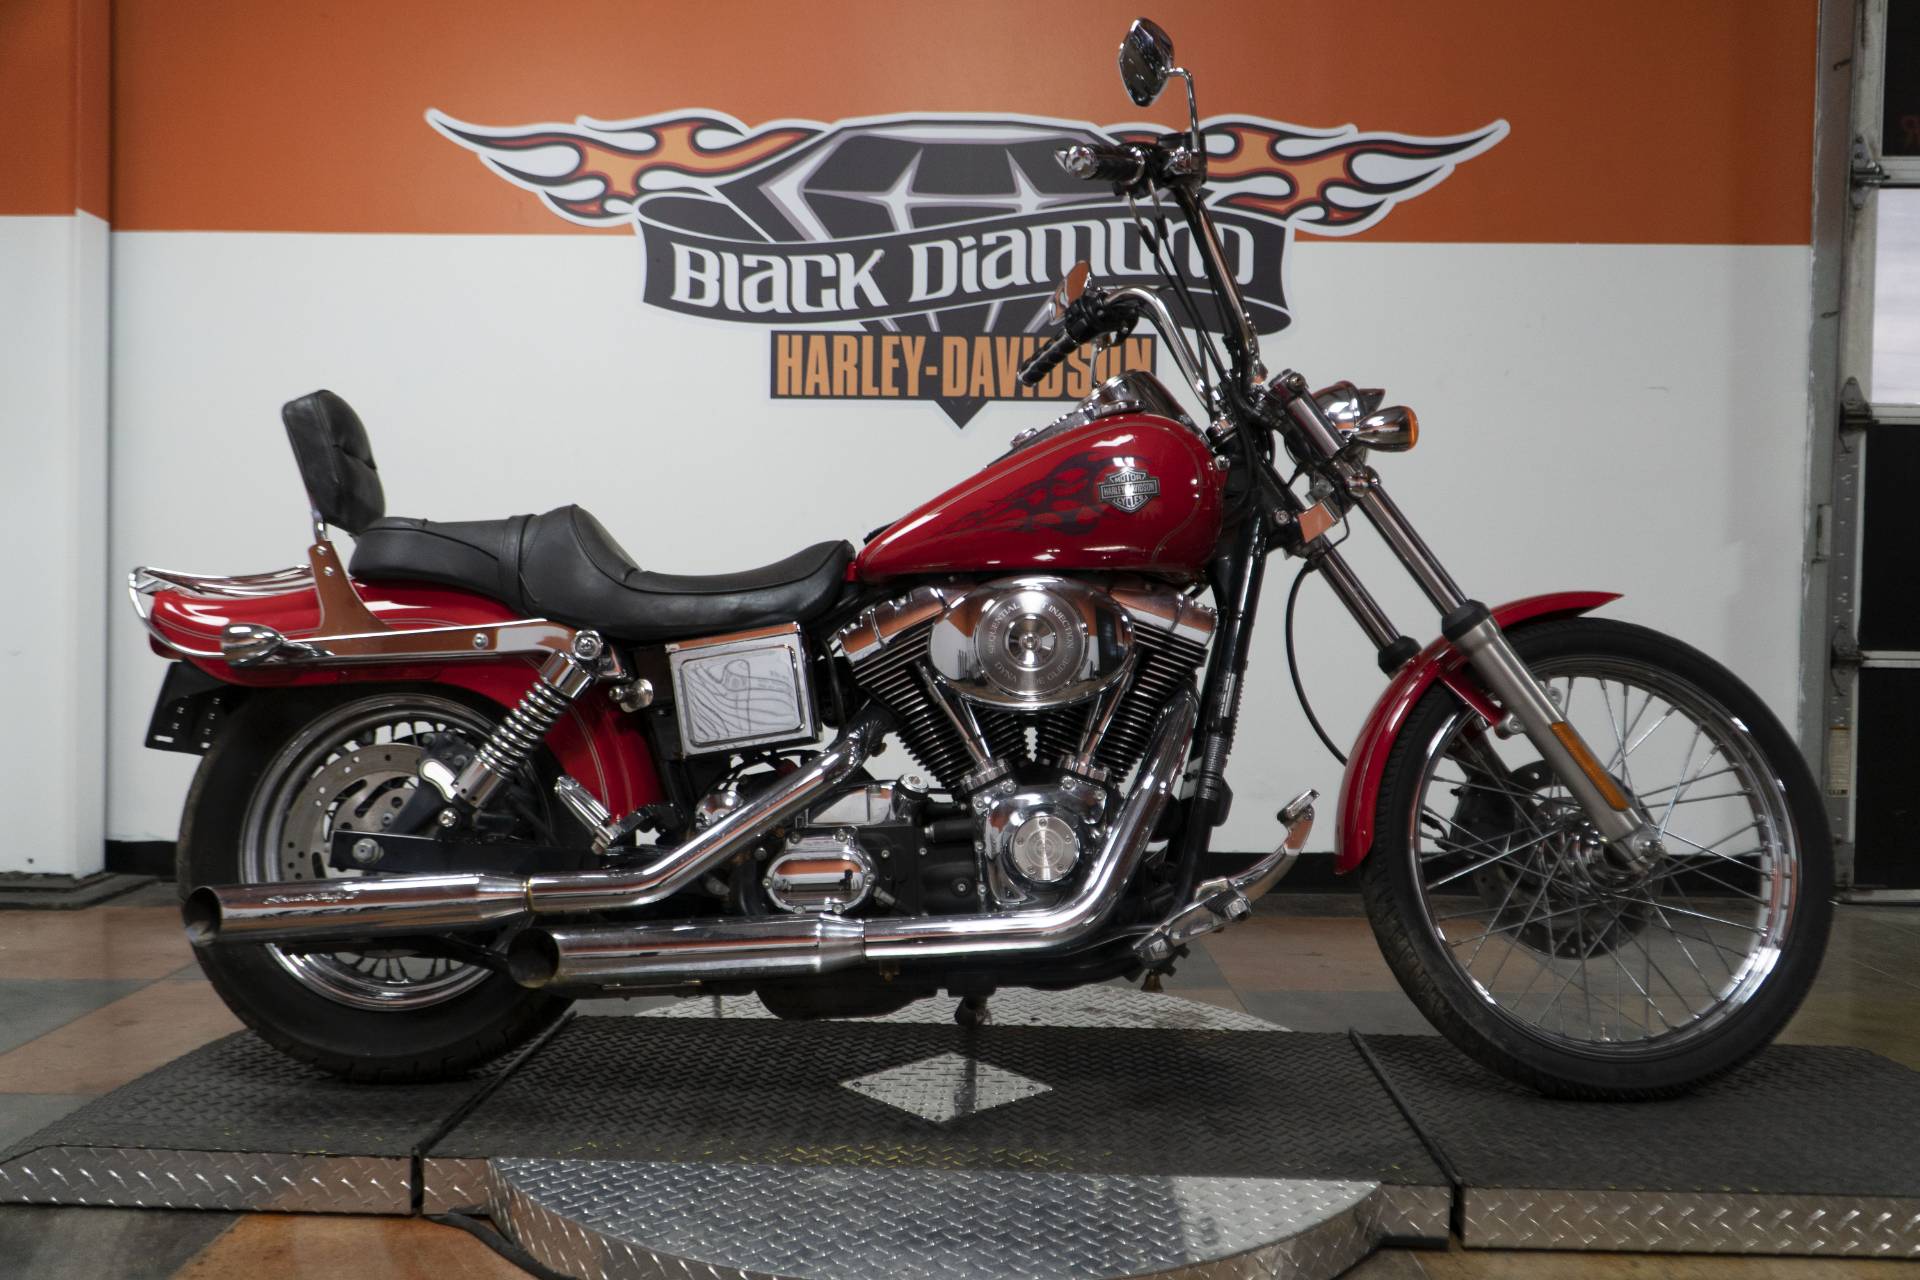 Used 2004 Harley Davidson Fxdwg Fxdwgi Dyna Wide Glide Real Red Motorcycles In Marion Il U305805